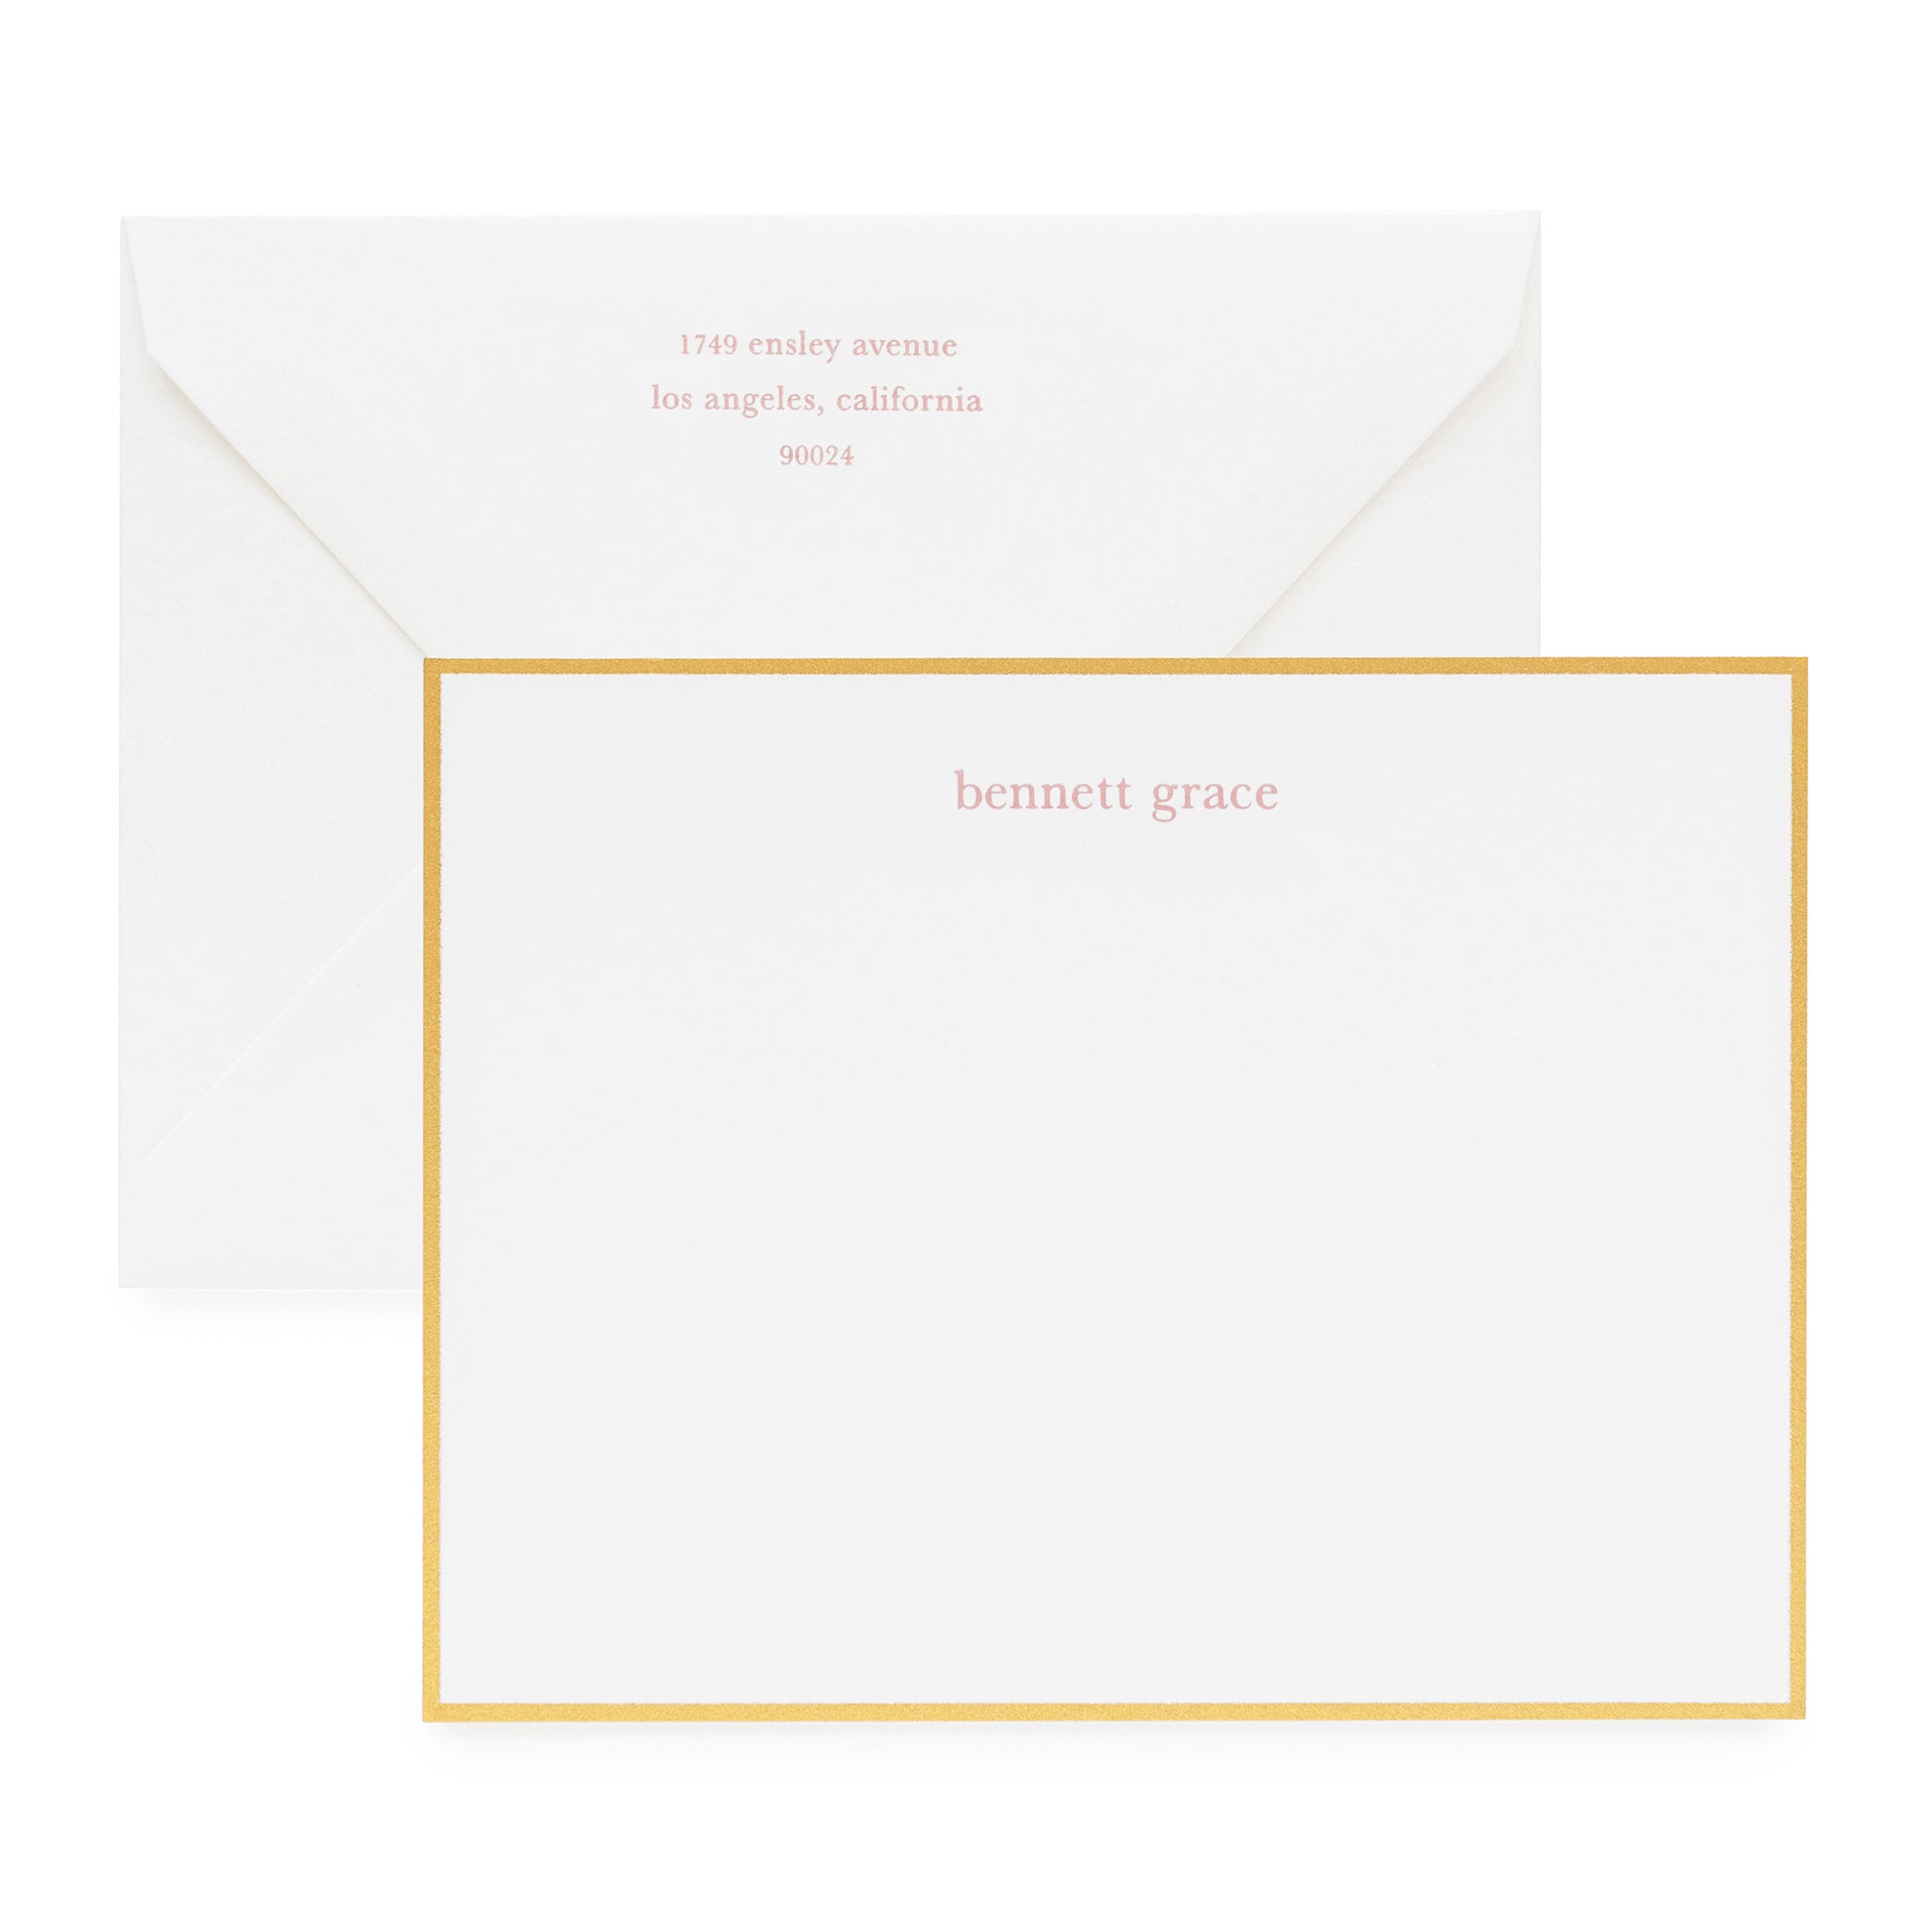 Dusty rose ink letterpress stationery on white paper with white envelope